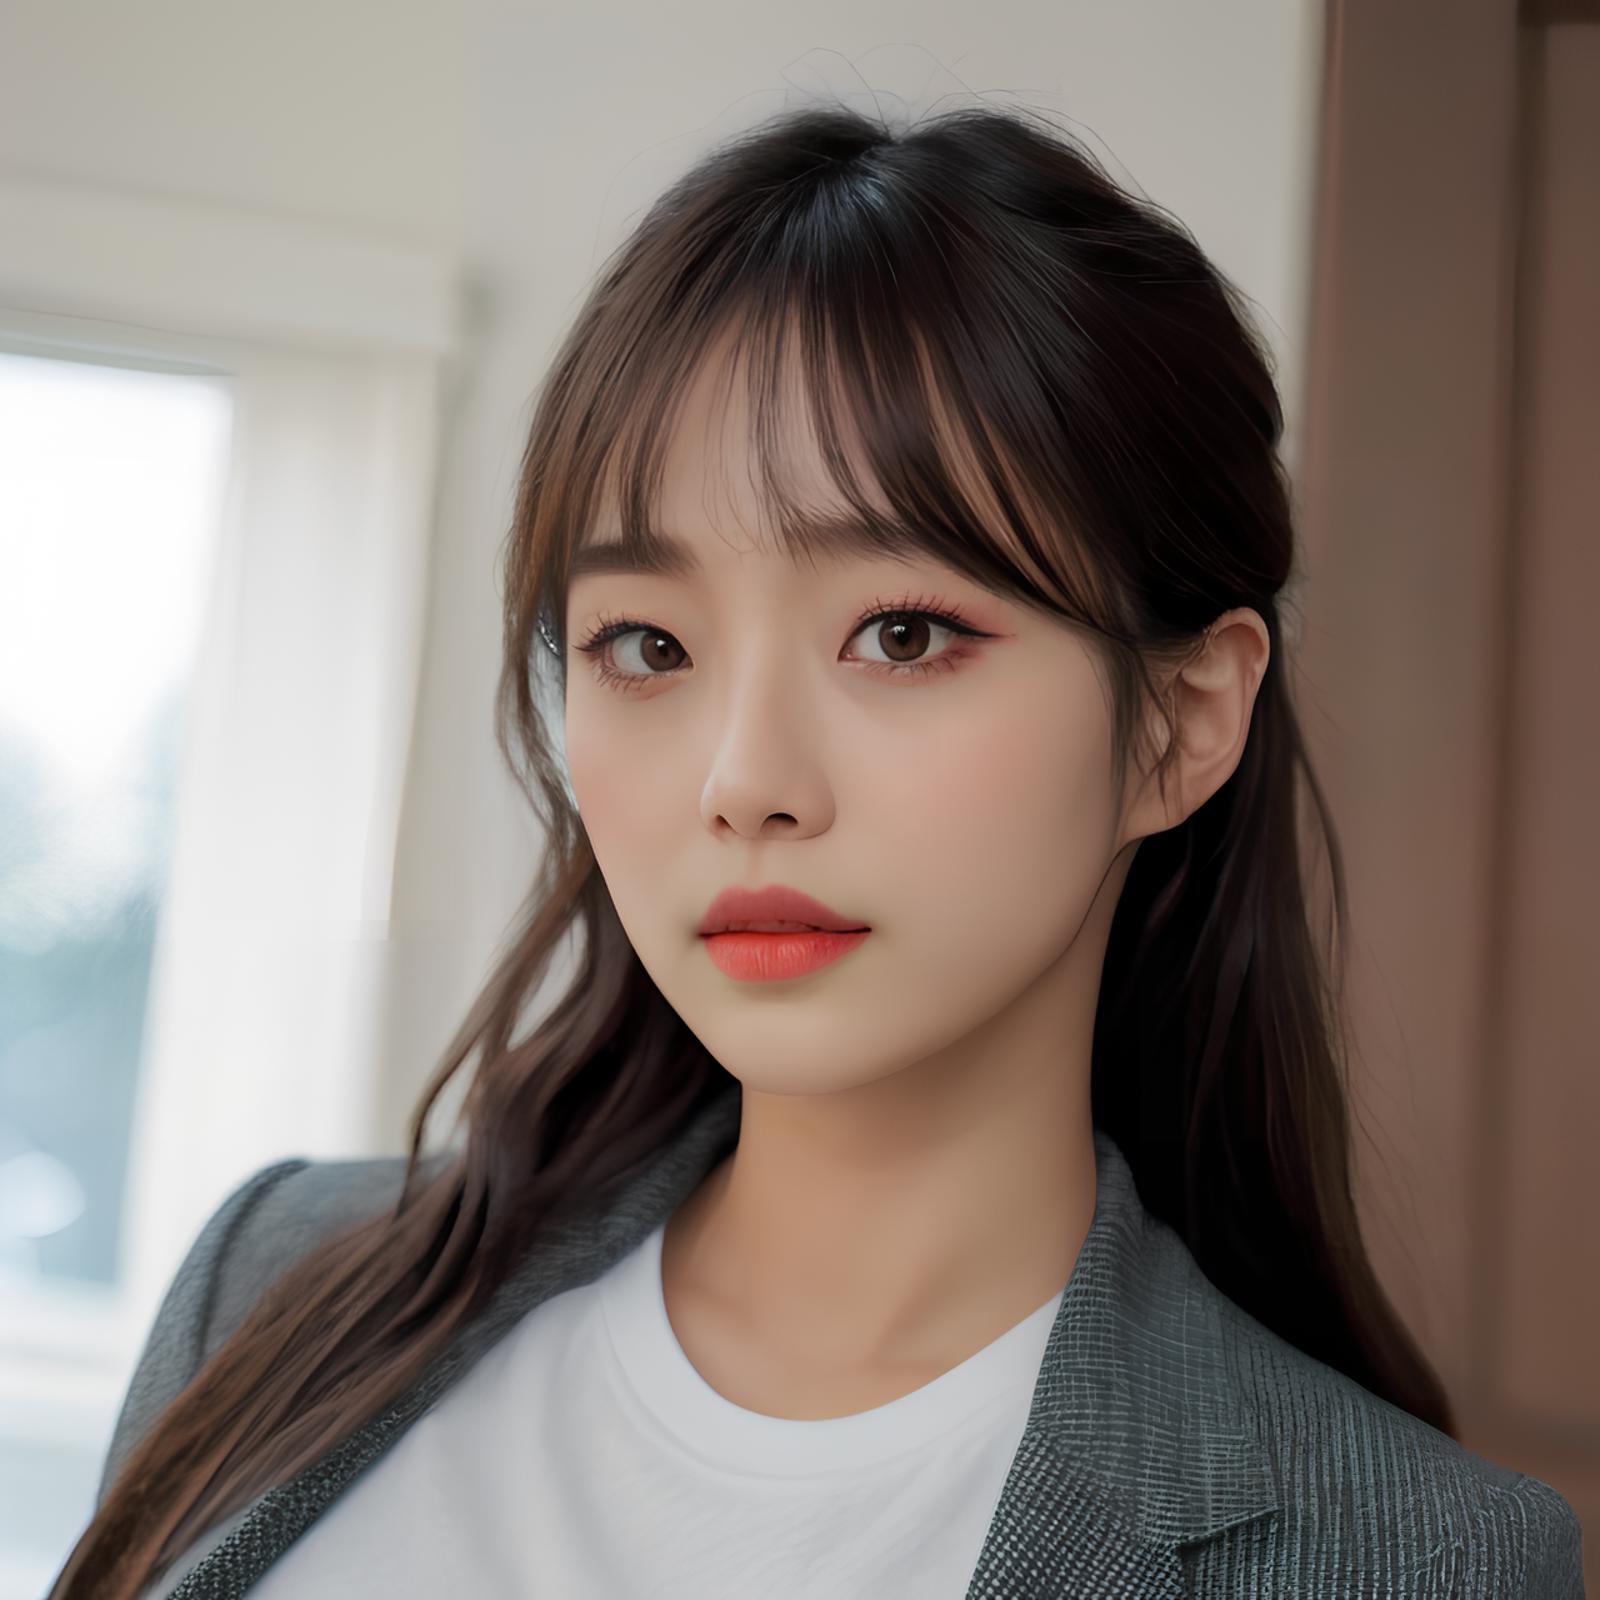 Not Loona - Chuu image by Tissue_AI